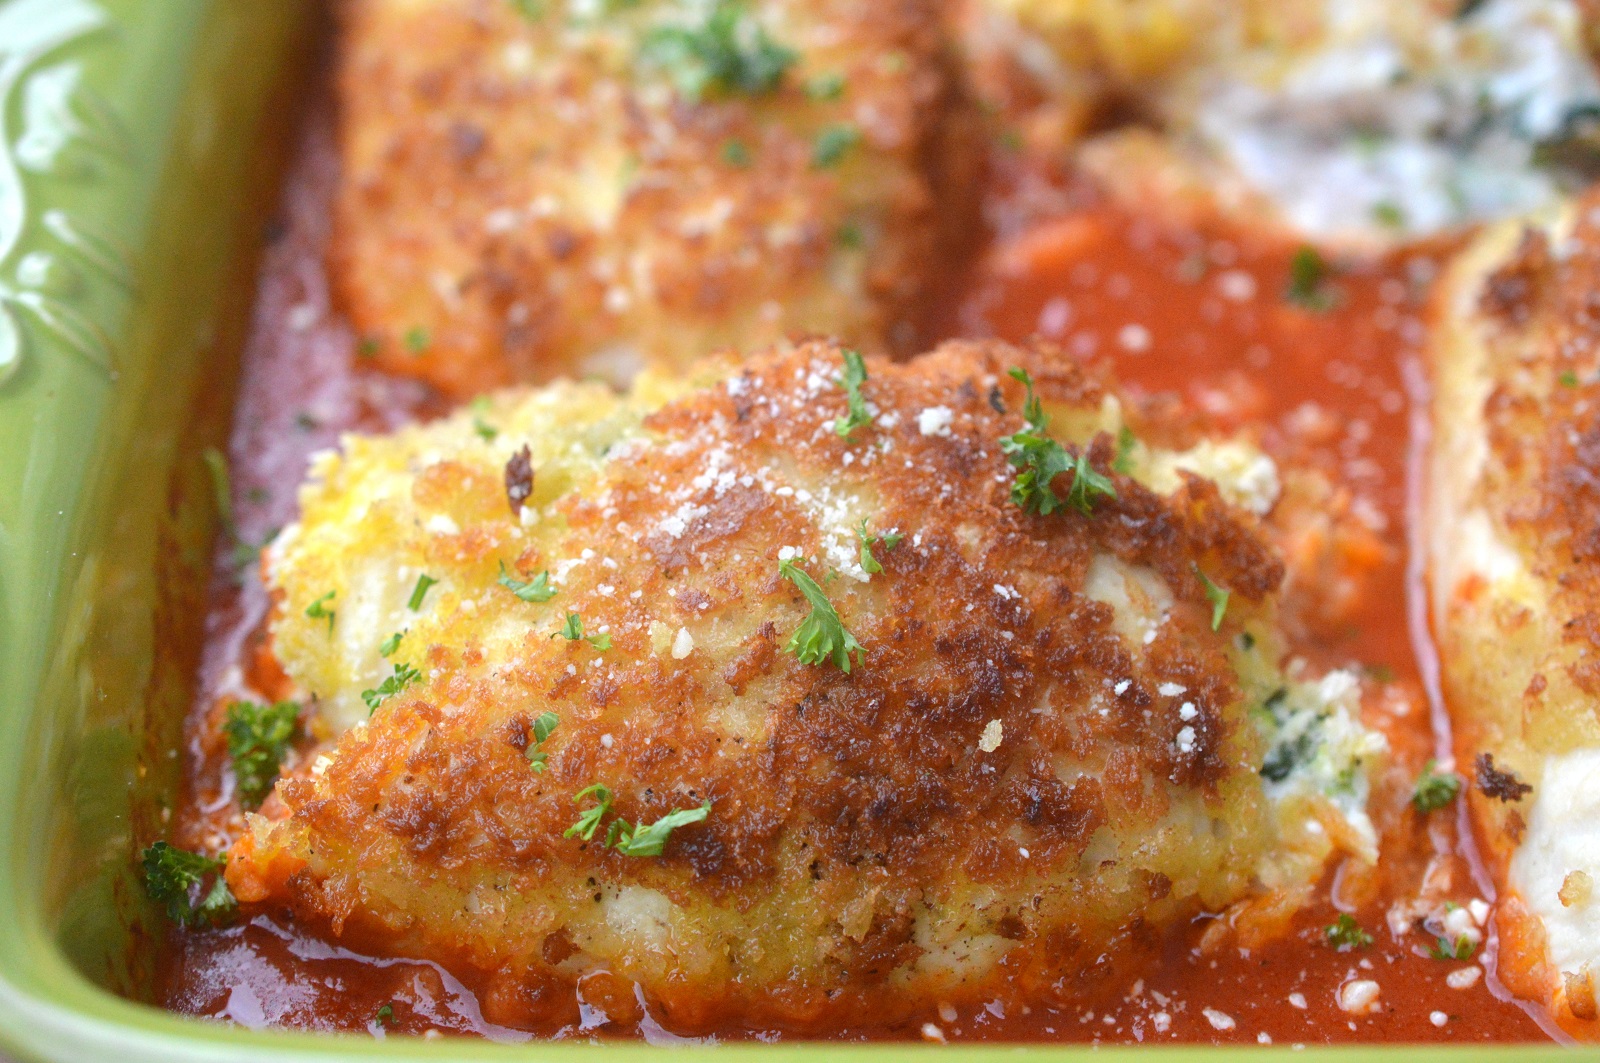 Lasagna Stuffed Chicken Breasts with Spinach Like a Chicken Rollatini